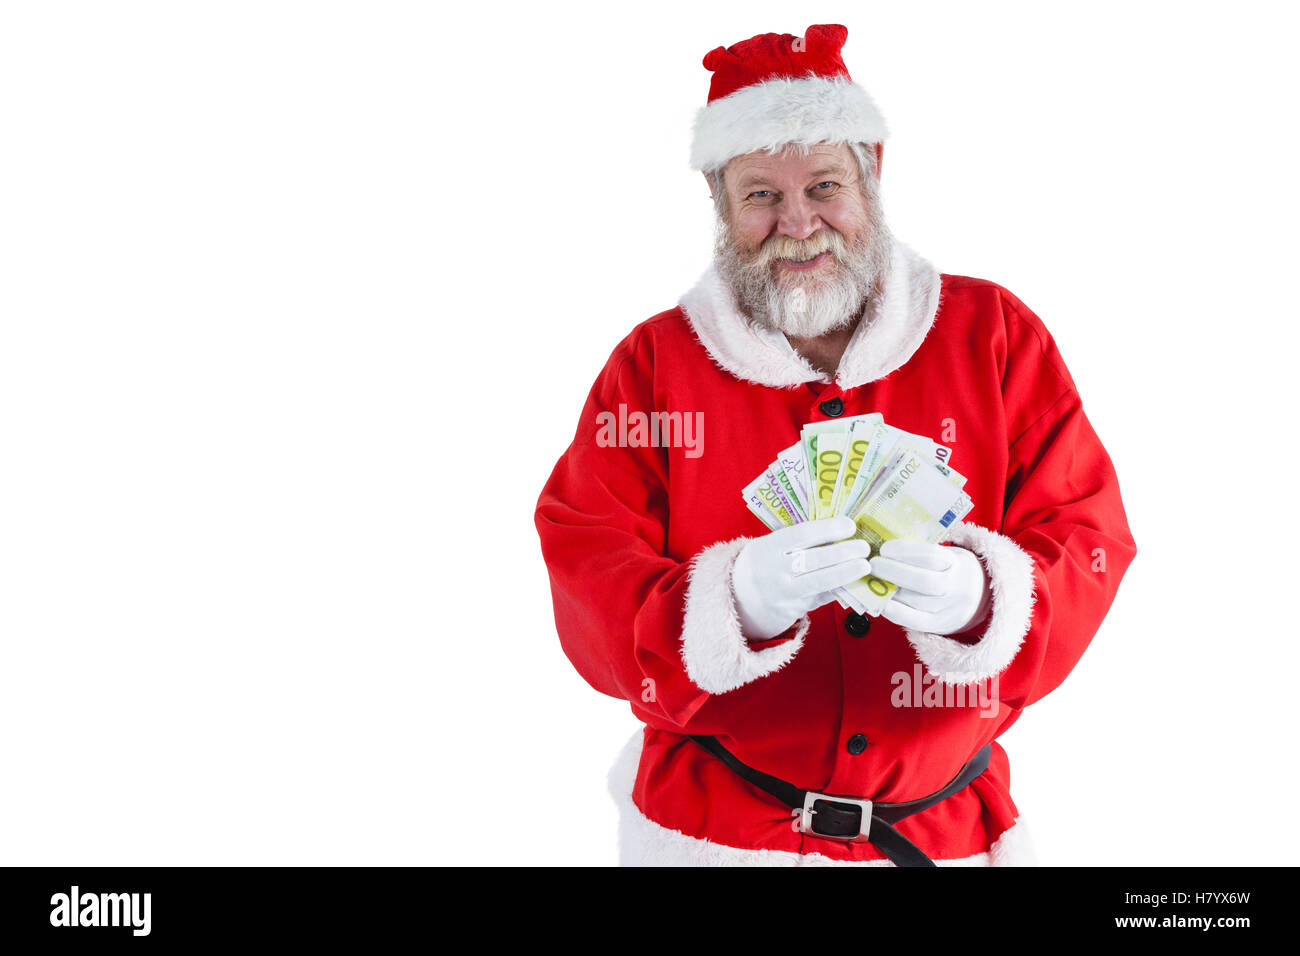 Santa claus showing currency notes Stock Photo